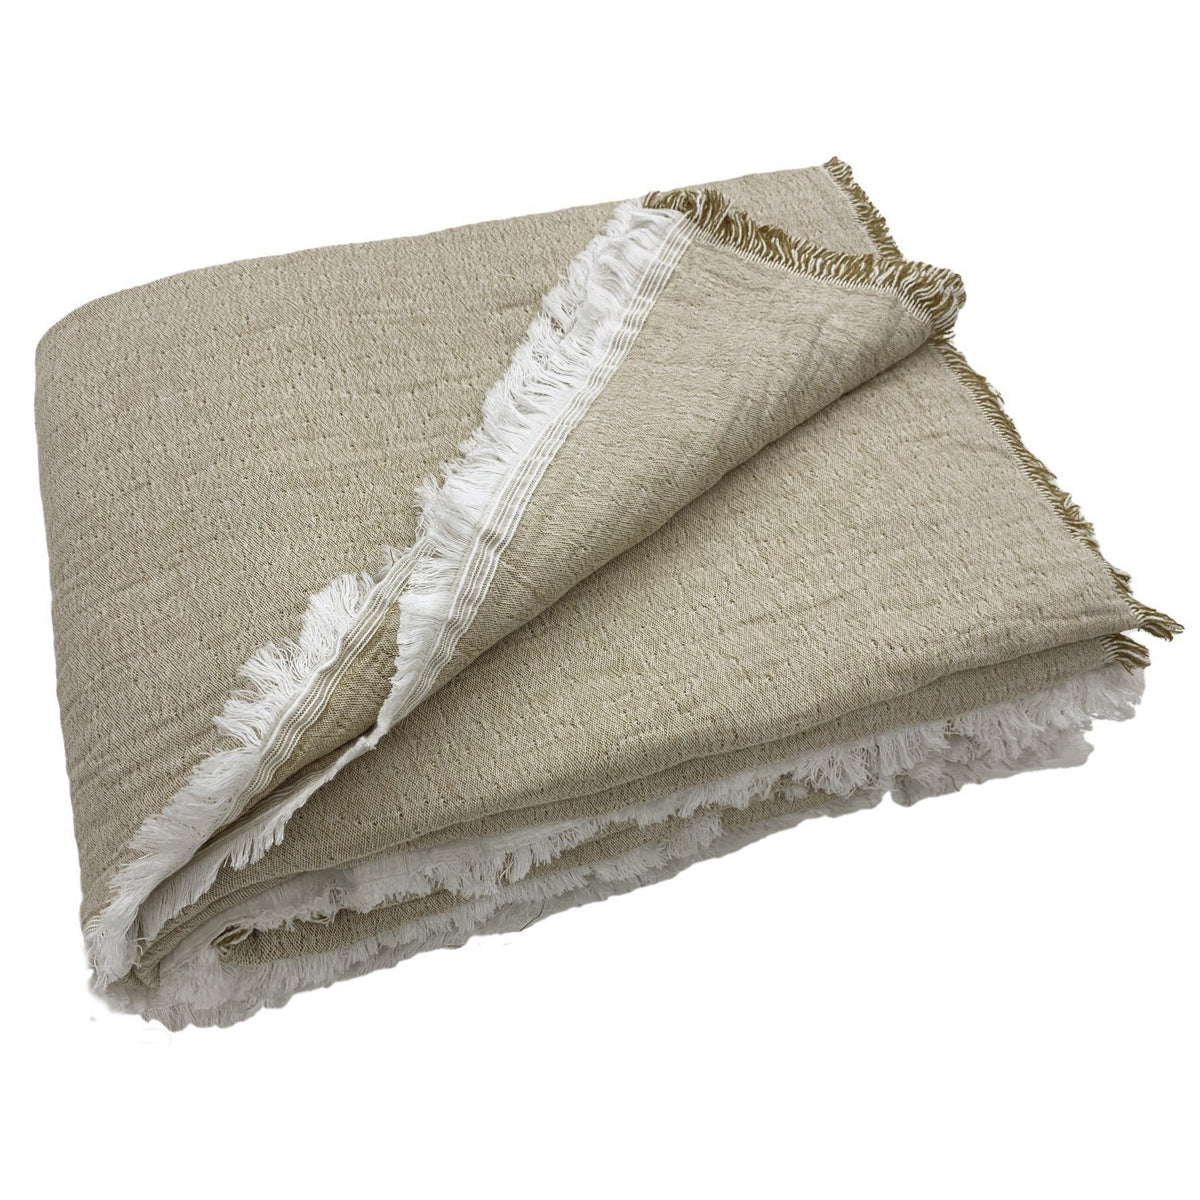 Bedspread in Stonewashed Cotton with Fringes - Mellow